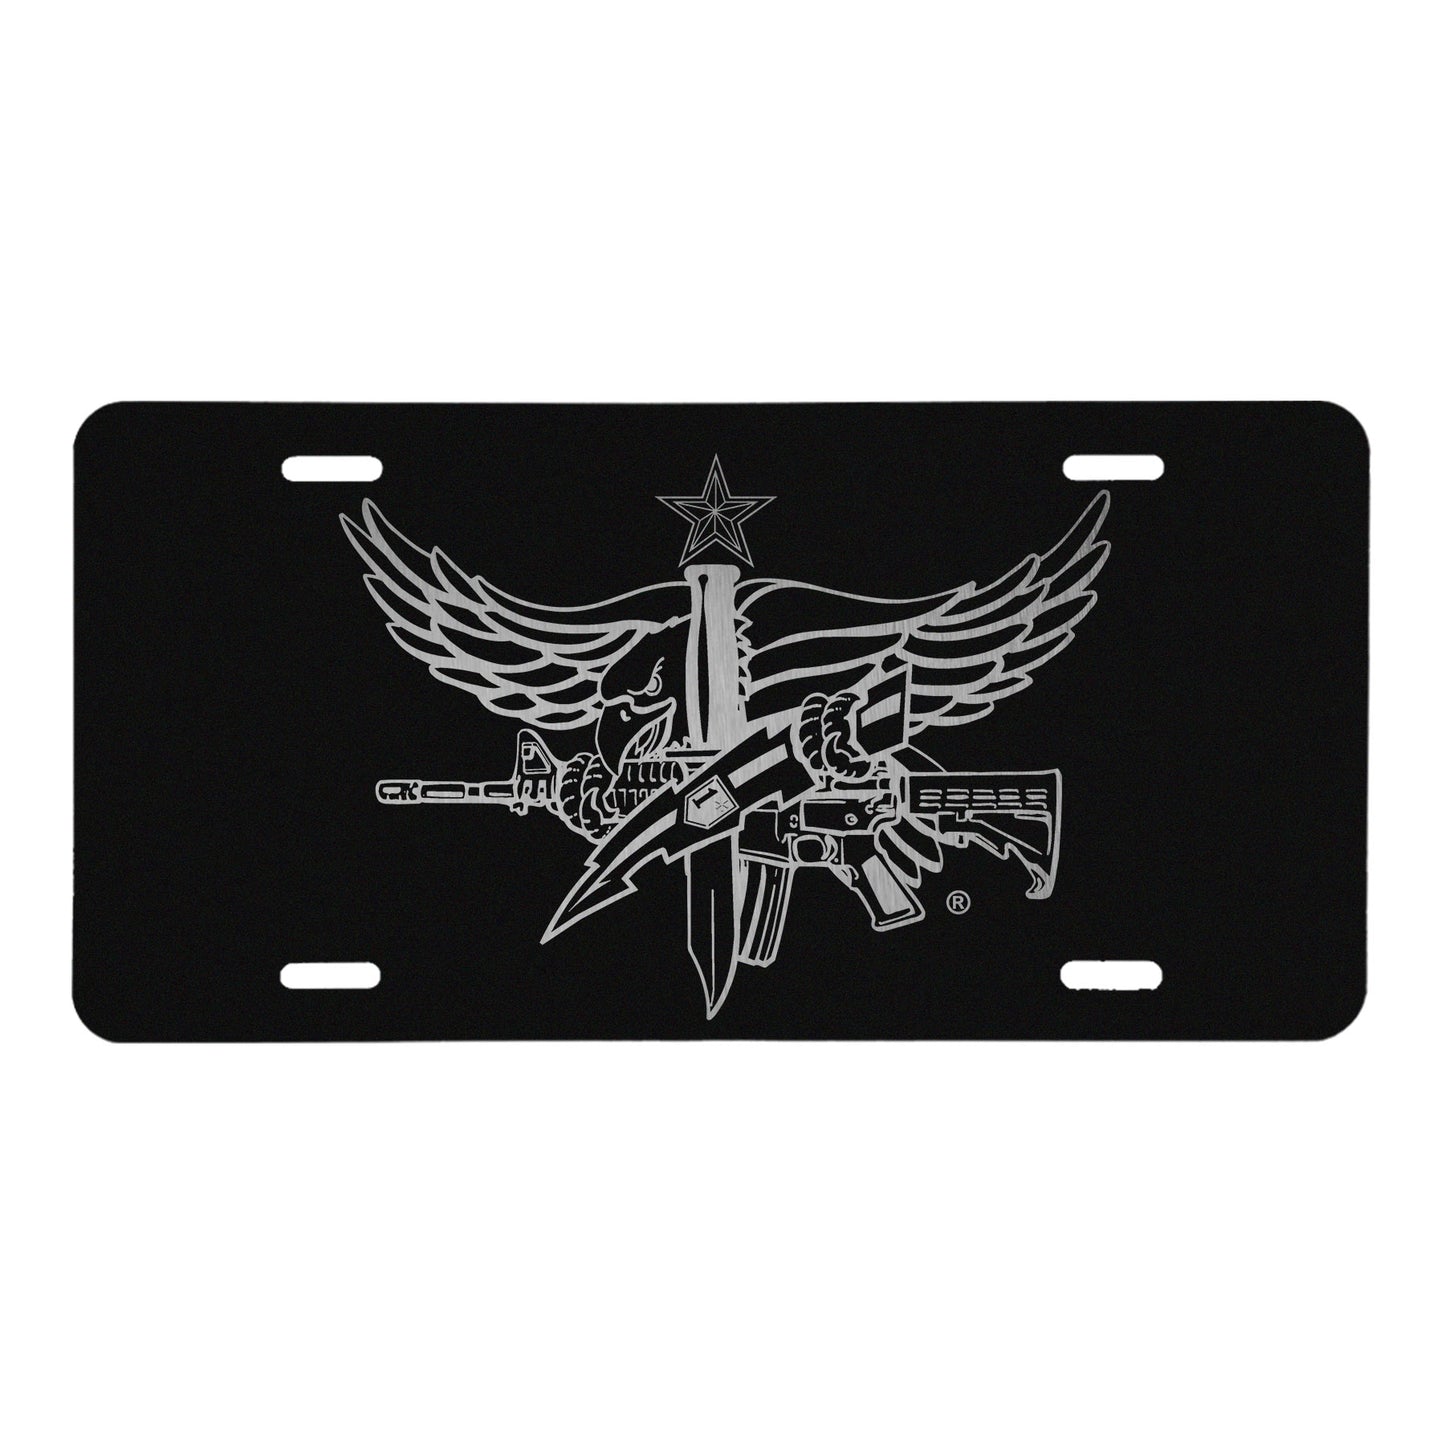 SWAT Operator Lasered License Plate